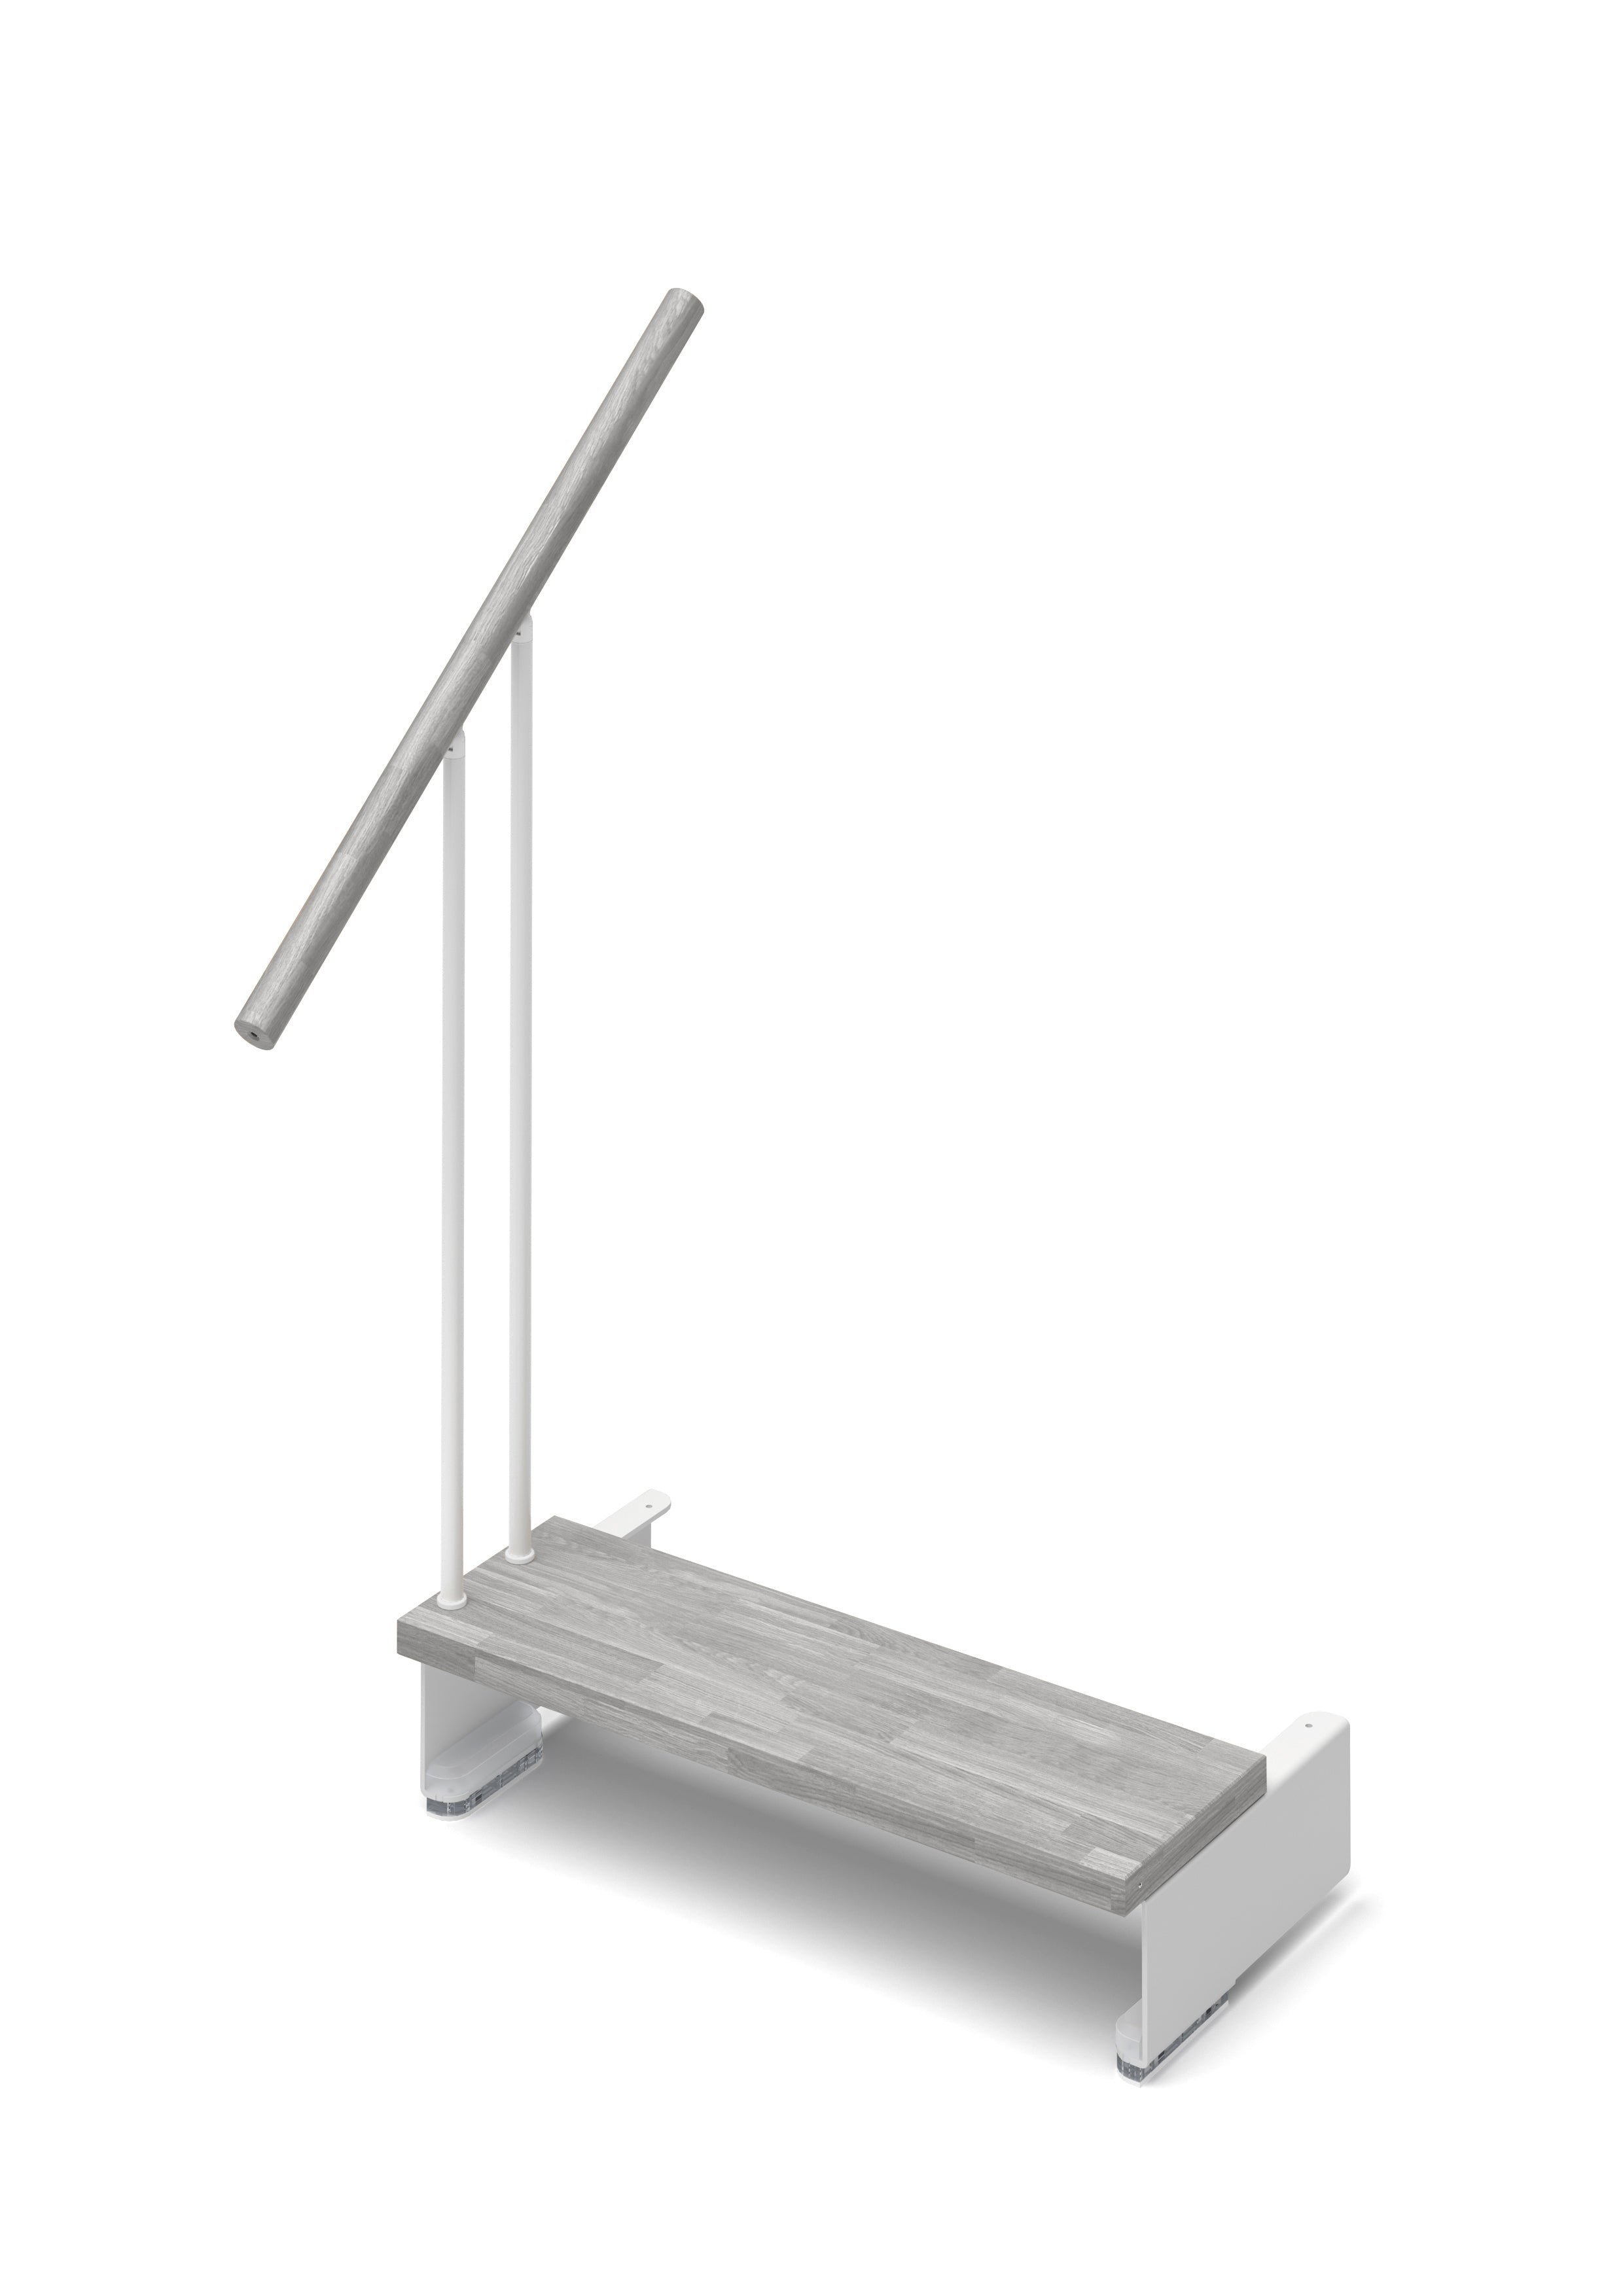 Additional step Adapta 84cm (with structure and railing) - Cement 89